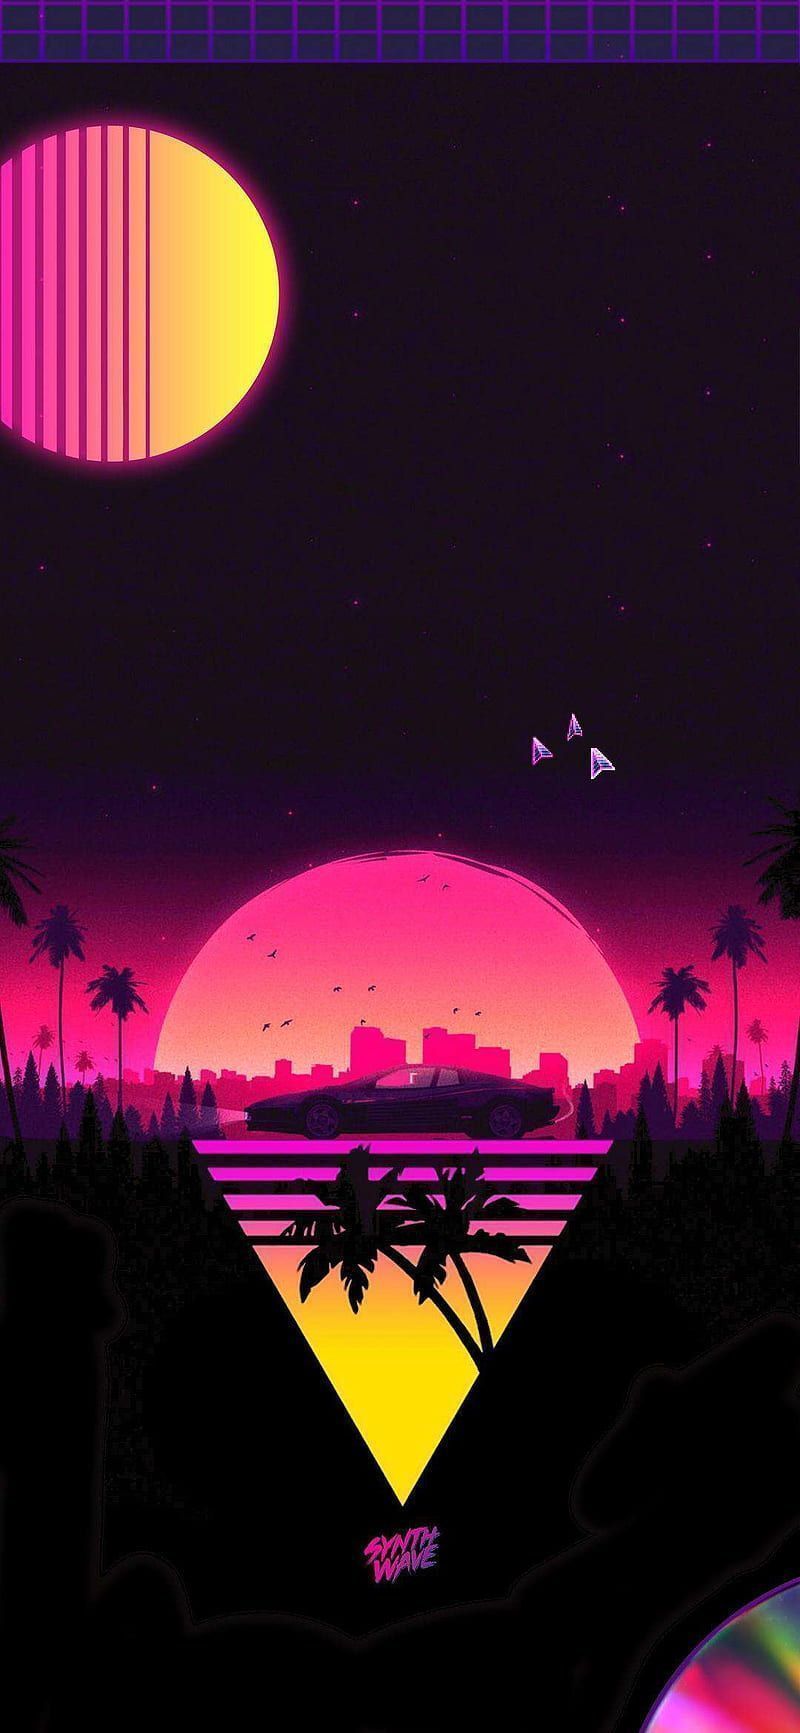 A poster of the sunset with palm trees - Synthwave